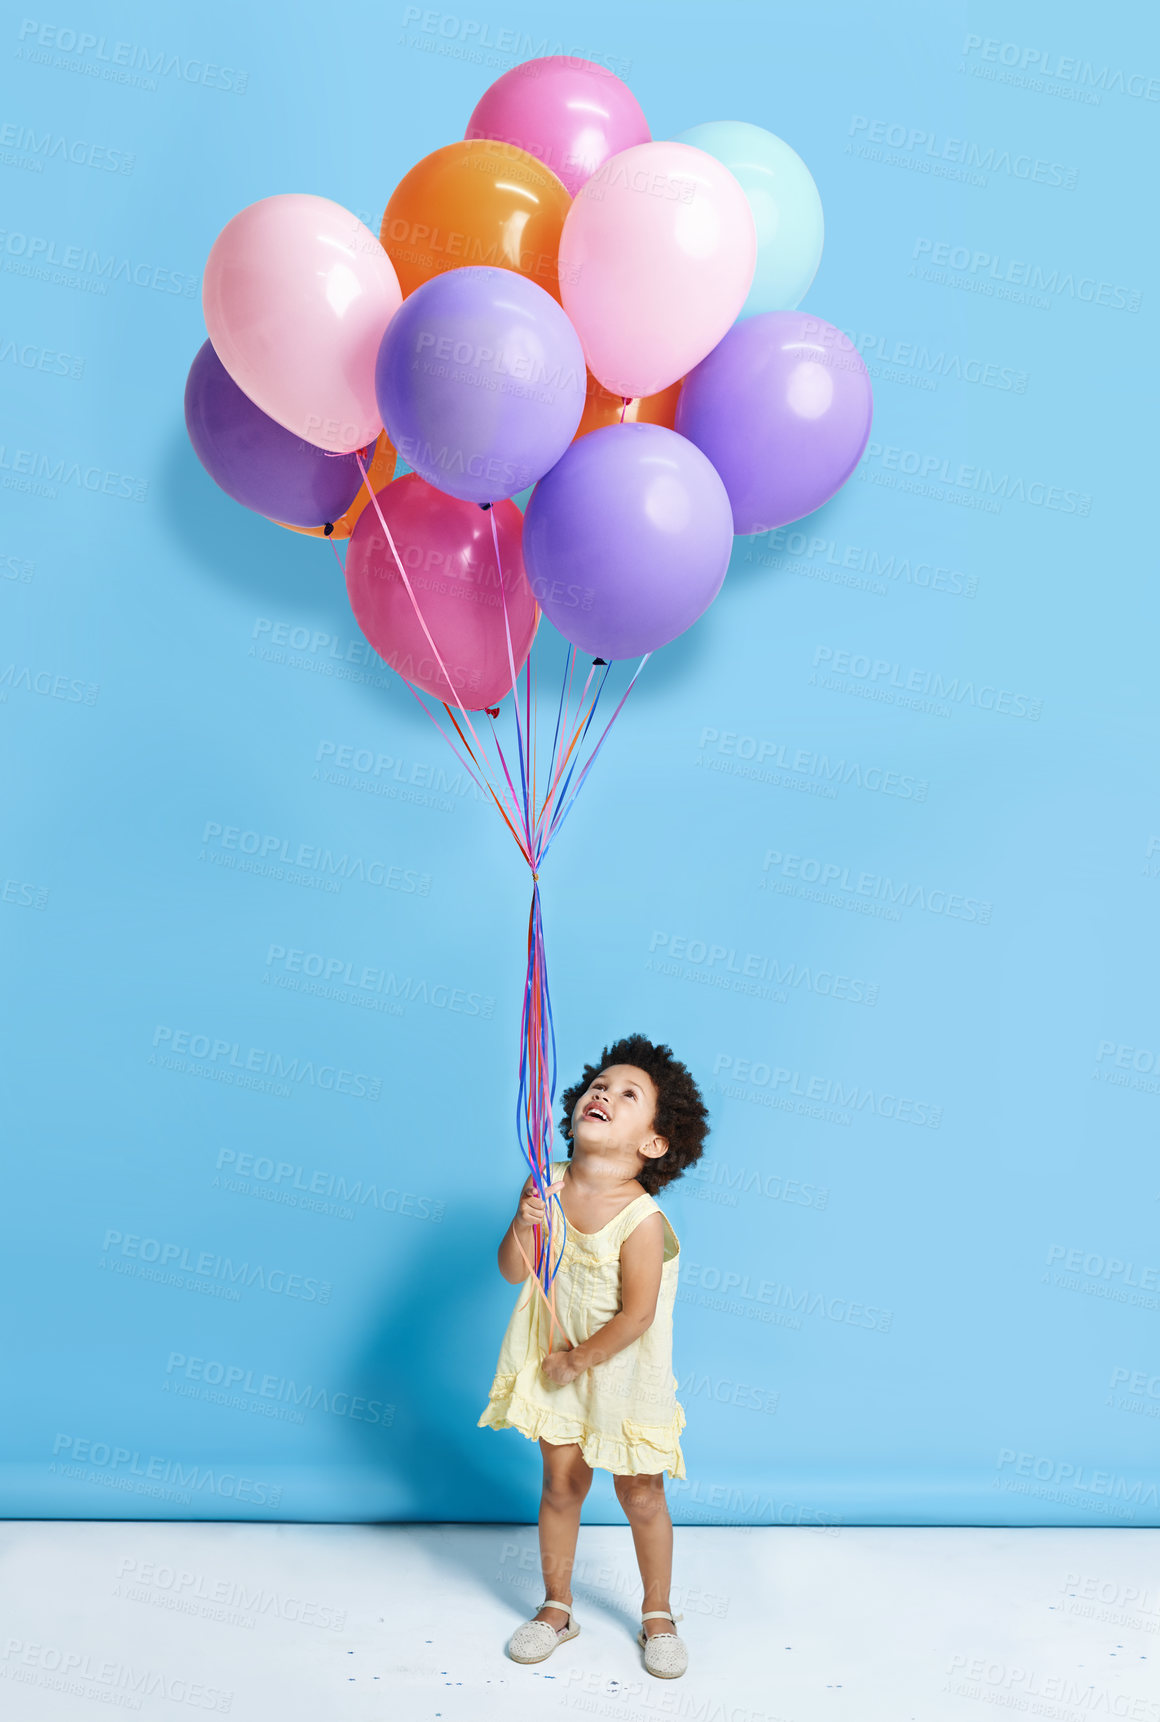 Buy stock photo Shot of a cute little girl holding a bunch of balloons against a blue background 